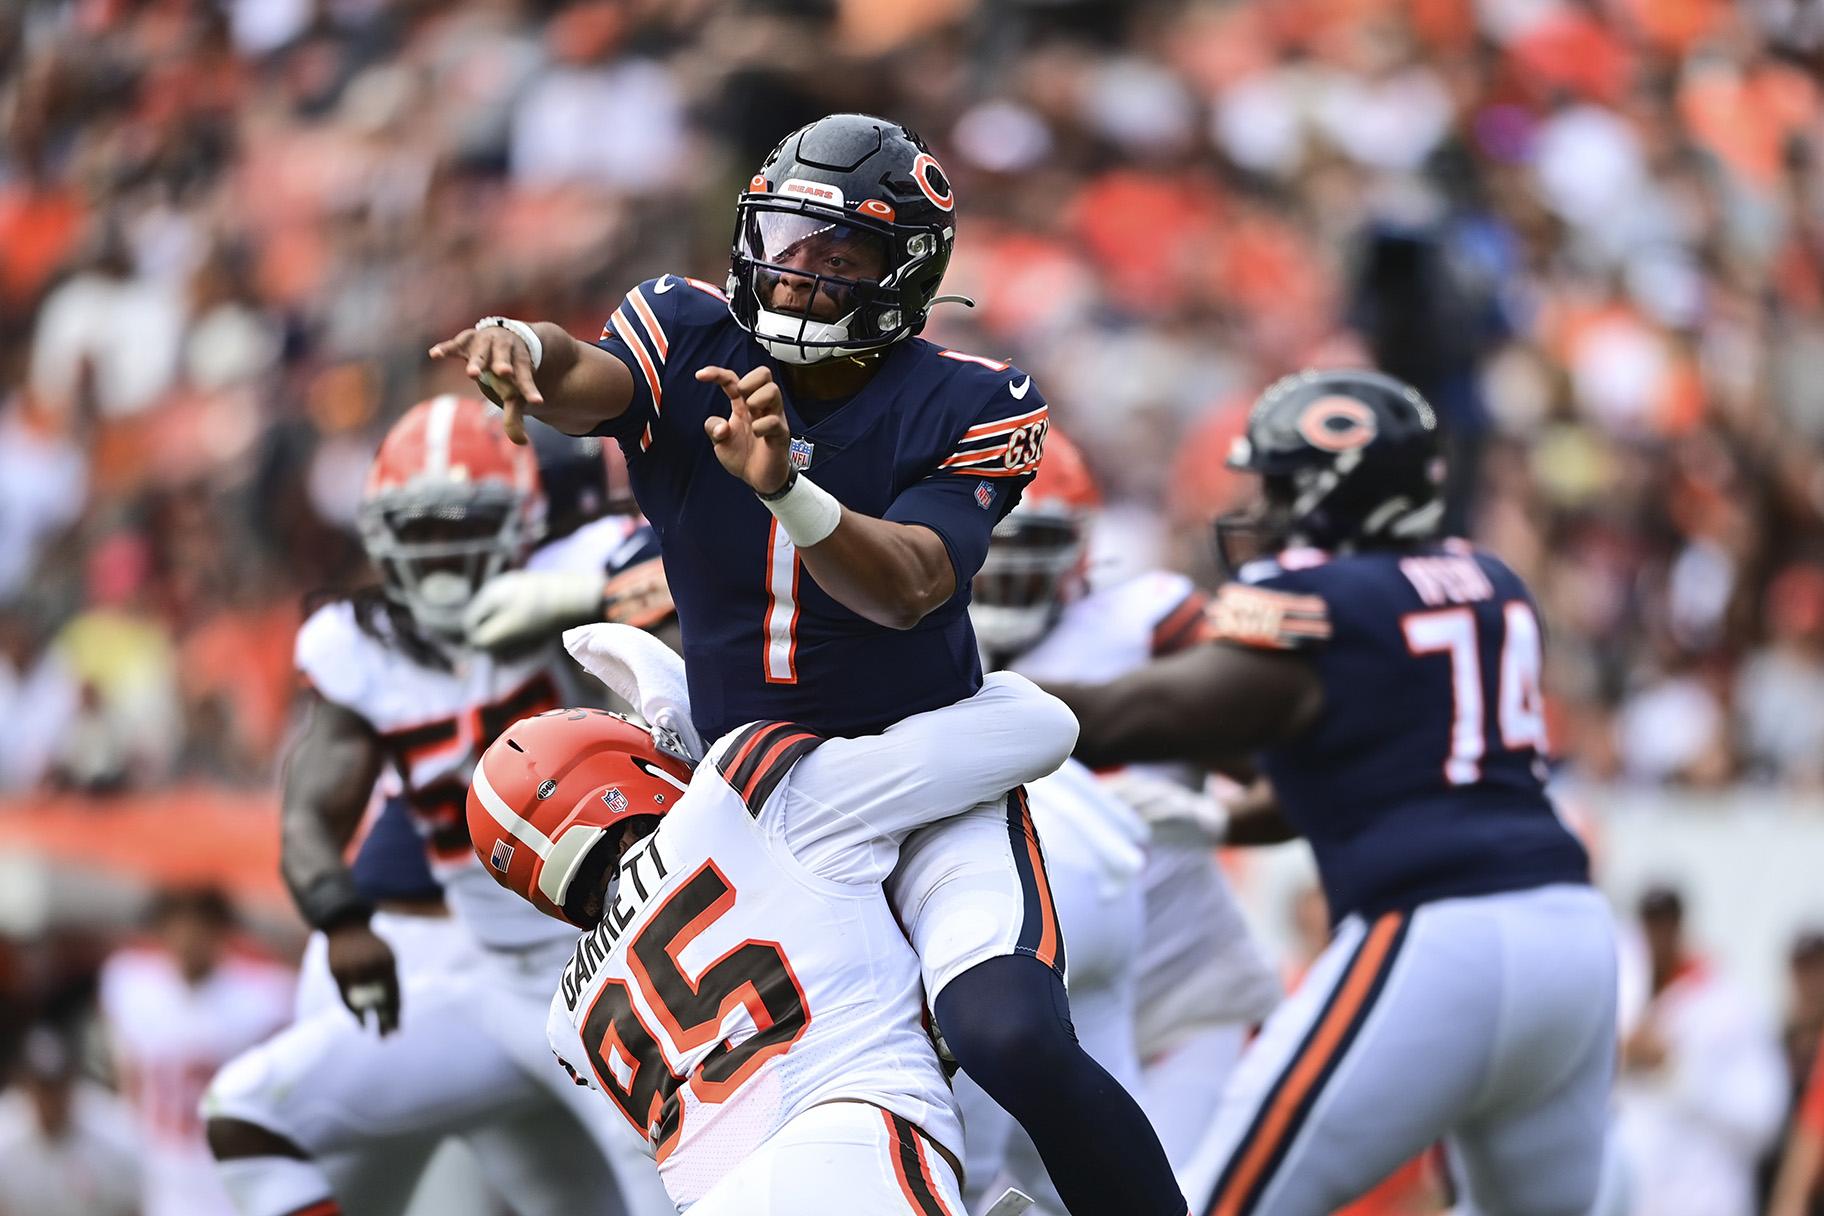 Chicago Bears quarterback Justin Fields (1) is hit by Cleveland Browns defensive end Myles Lorenz Garrett (95) after a pass during the second half of an NFL football game, Sunday, Sept. 26, 2021, in Cleveland. (AP Photo / David Dermer)